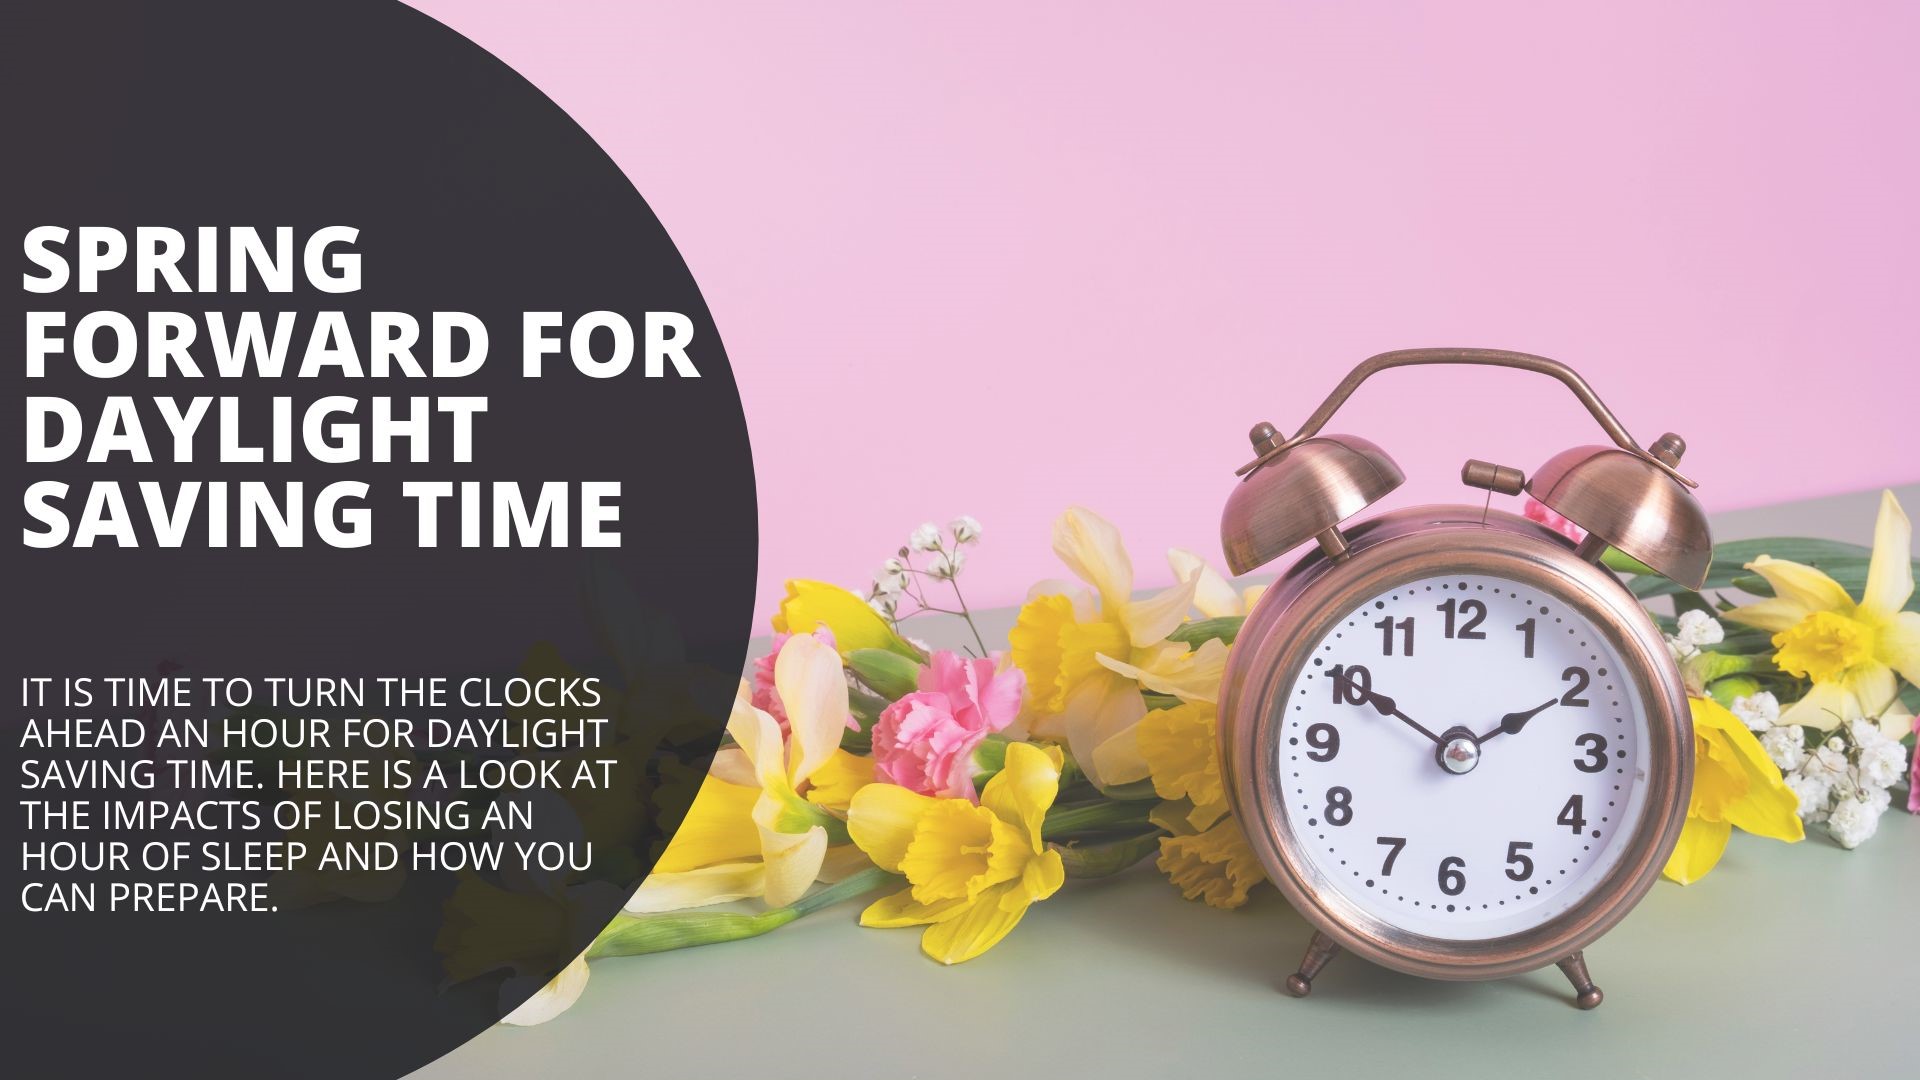 It is time to turn the clocks ahead an hour for Daylight Saving Time. Here is a look at the impacts of losing an hour of sleep and how you can prepare.